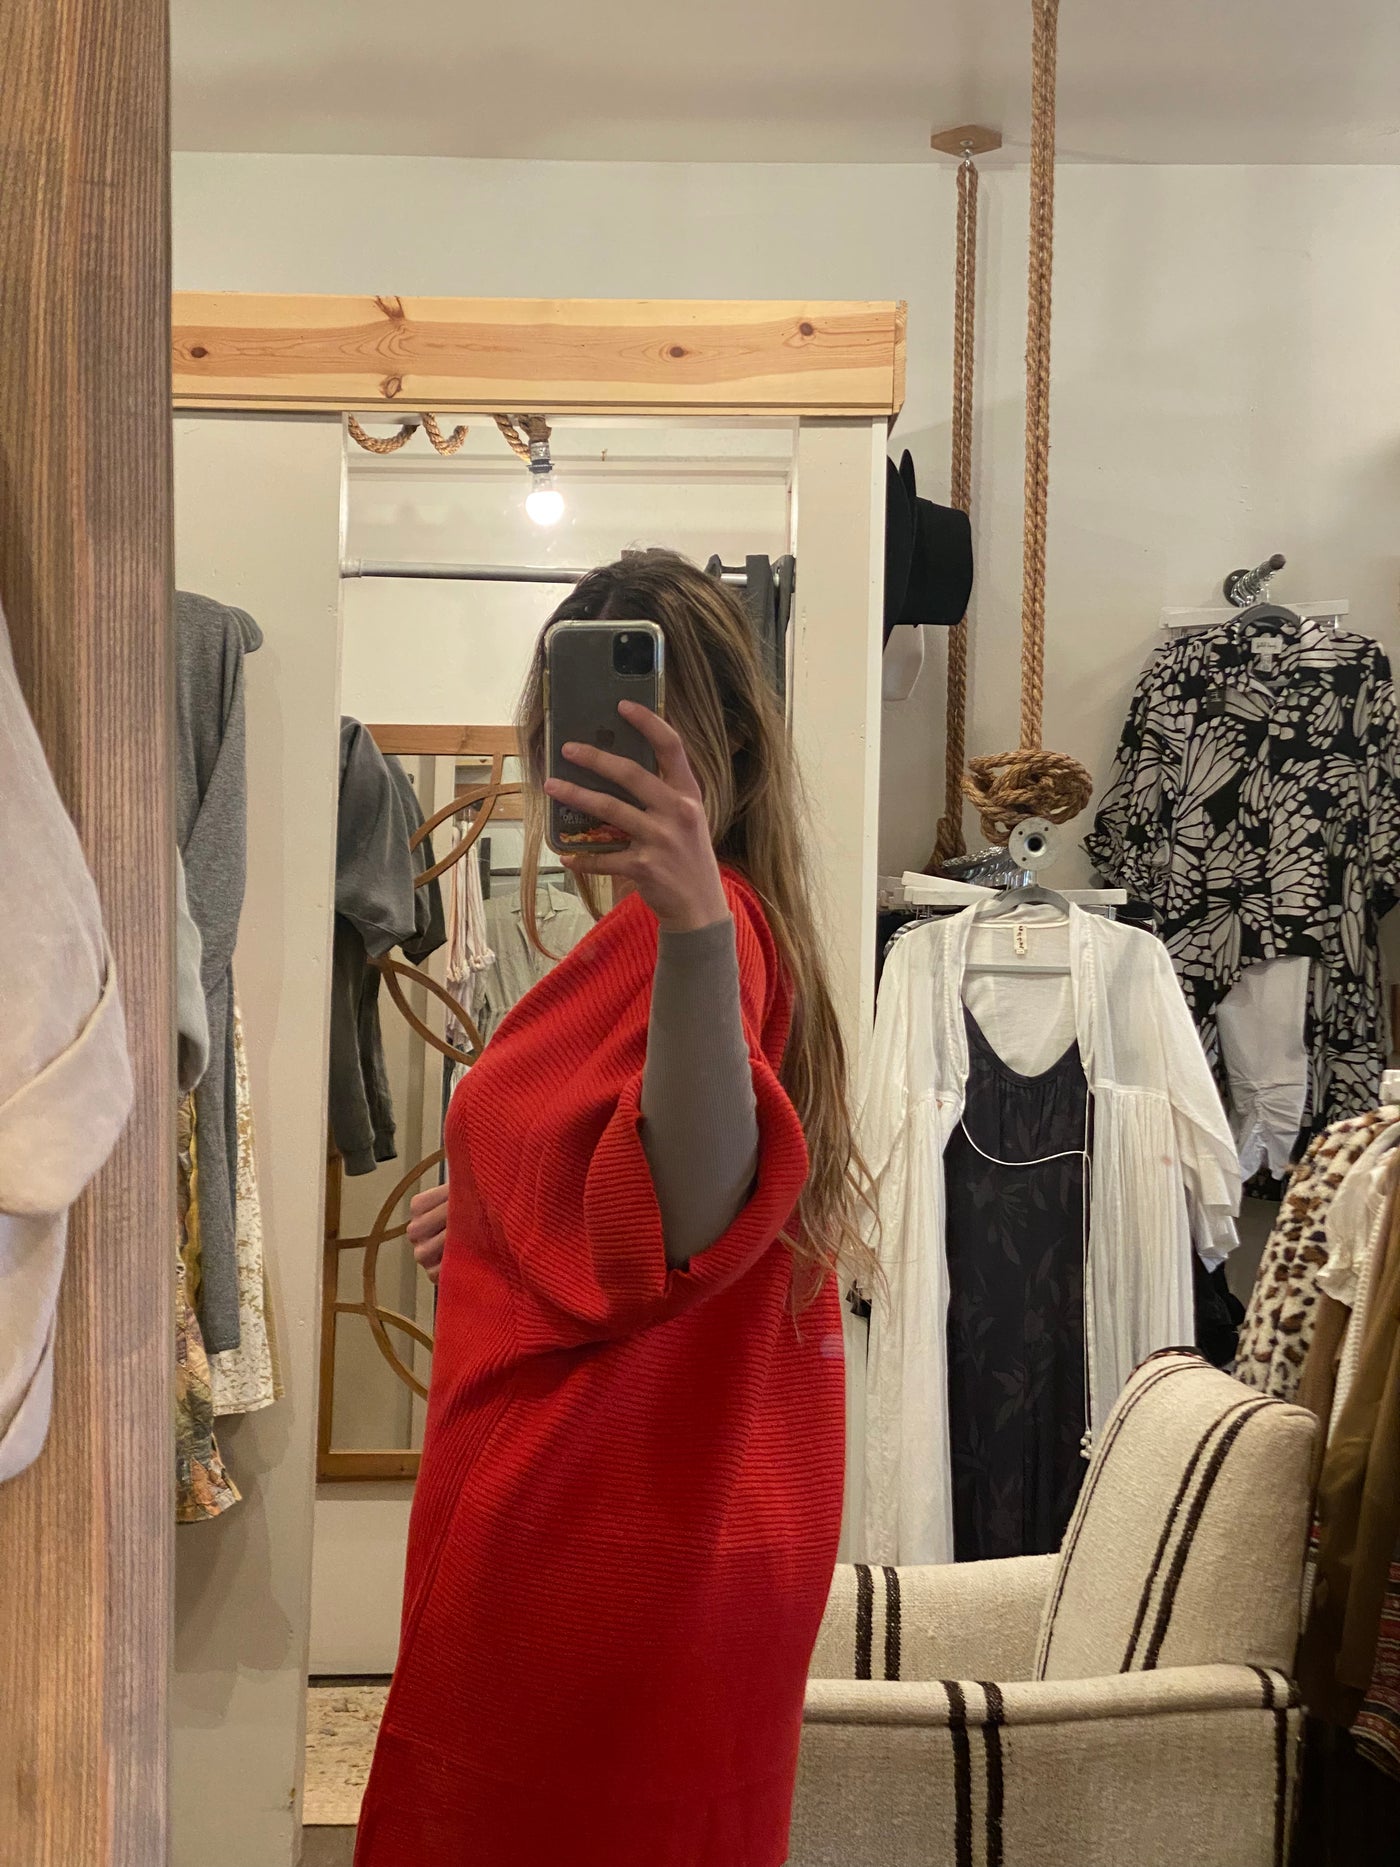 Girl standing backwards with long blonde hair taking a picture of herself in a mirror with a scarlet cardigan sweater